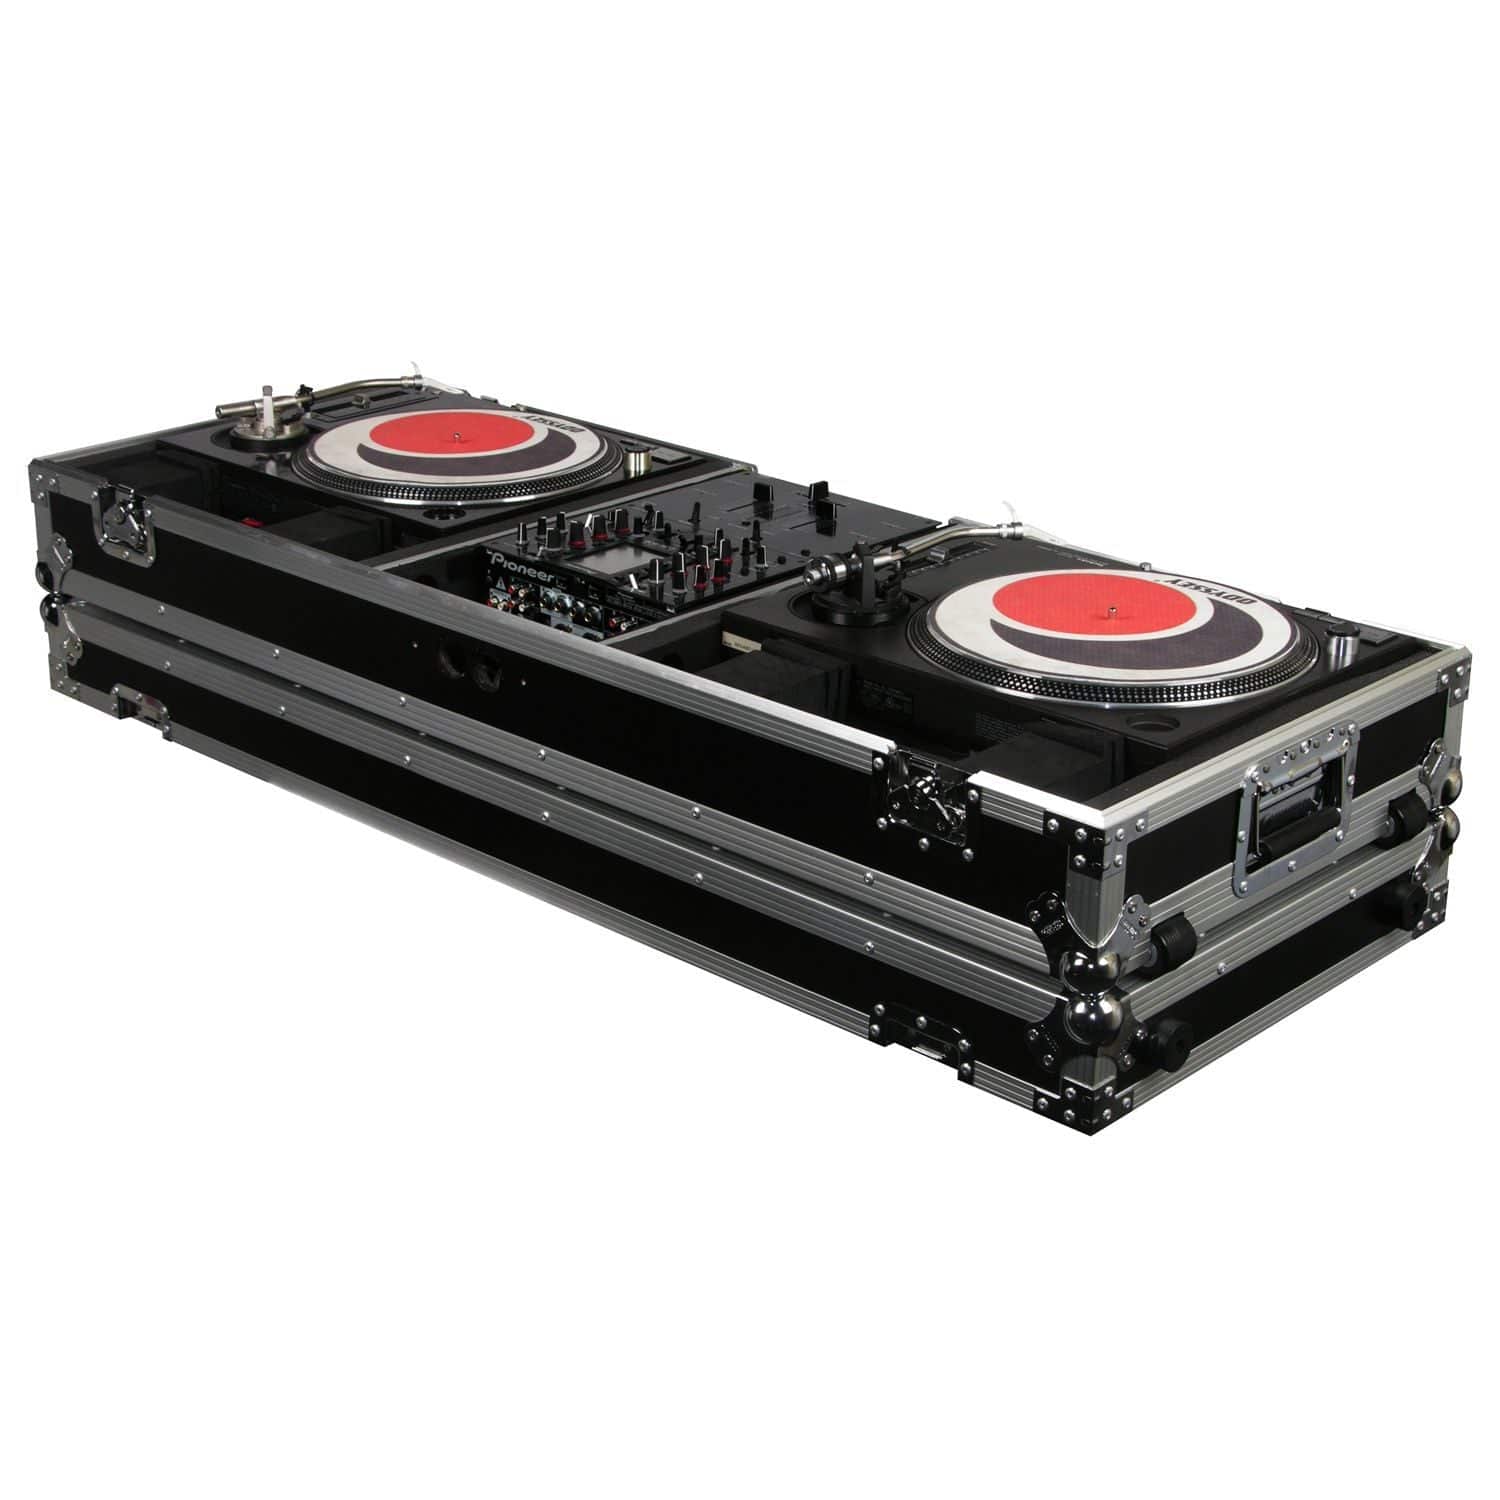 Odyssey FZDJ10W, 10″ Format DJ Mixer and Two Standard Position Turntables Flight Coffin Case with Wheels - Hollywood DJ